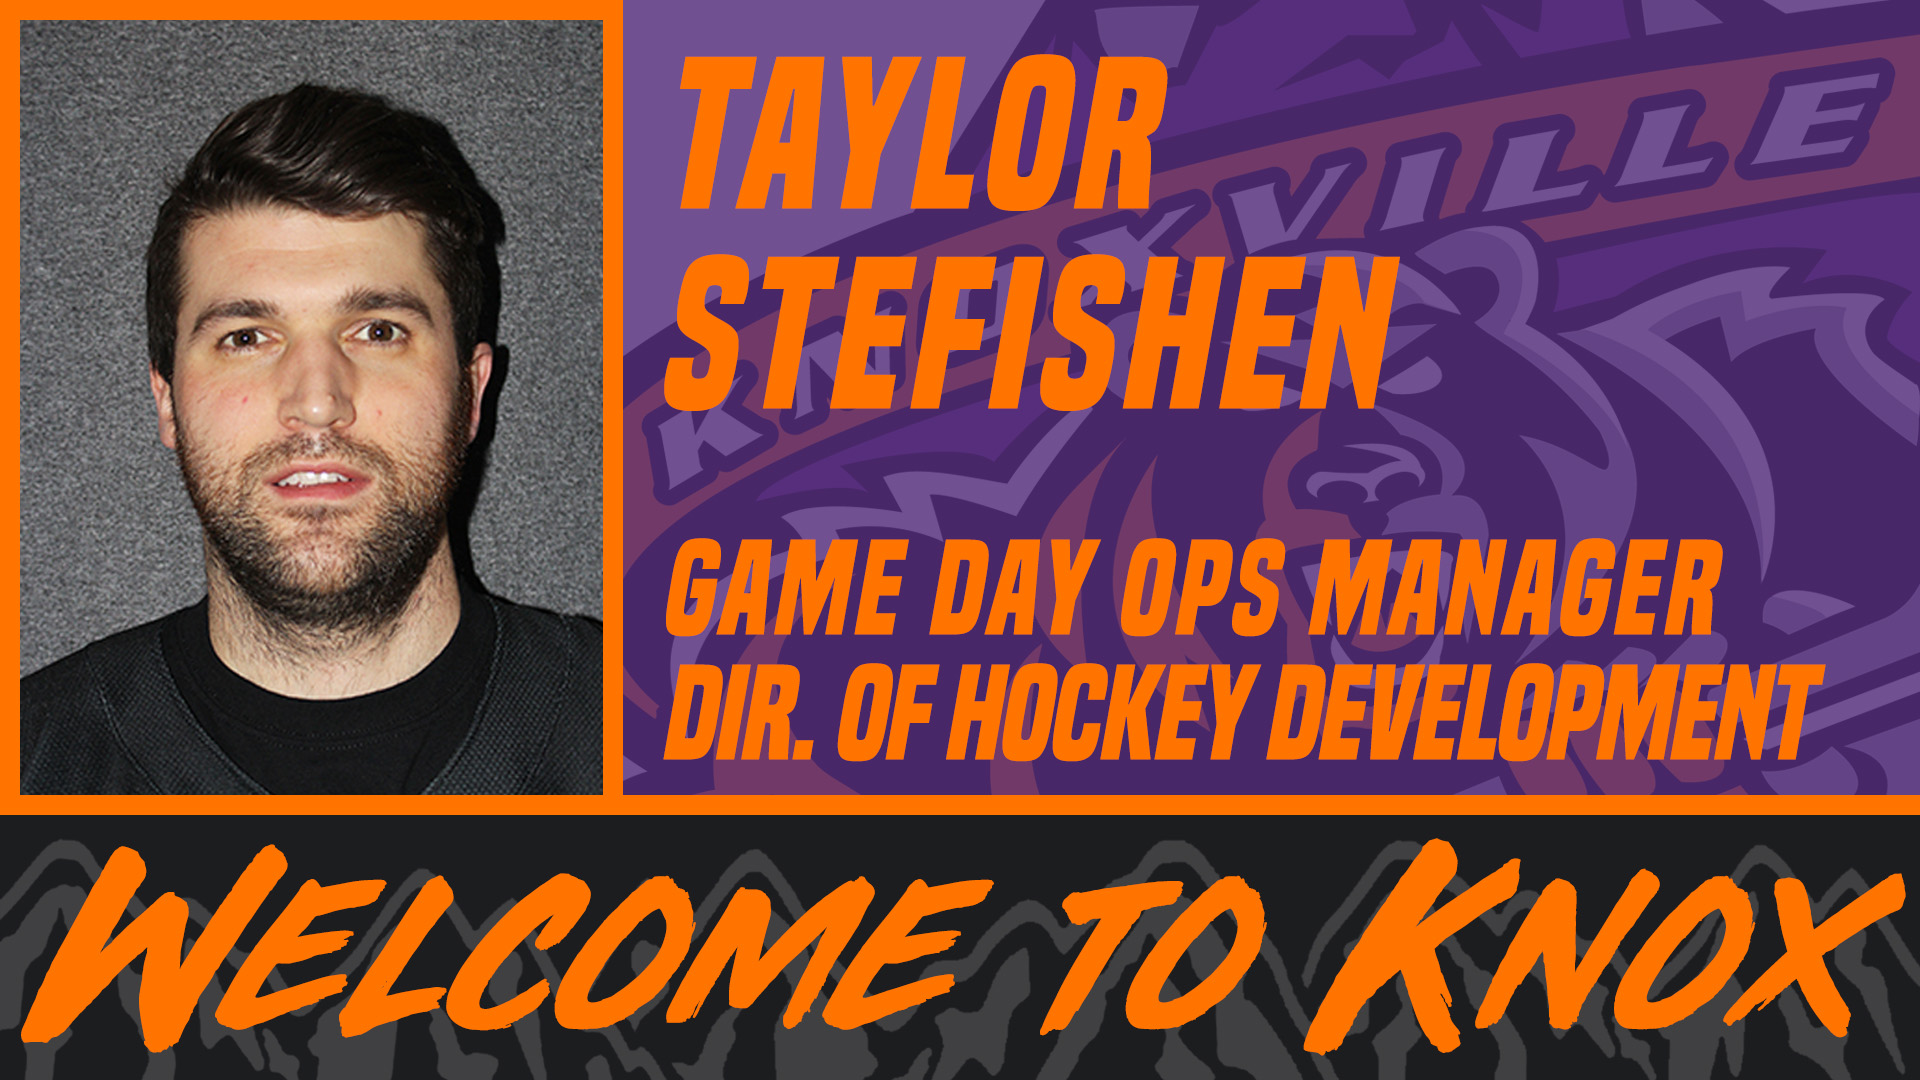 Ice Bears add Stefishen for Hockey Development, Game Day Ops - Knoxville  Ice Bears